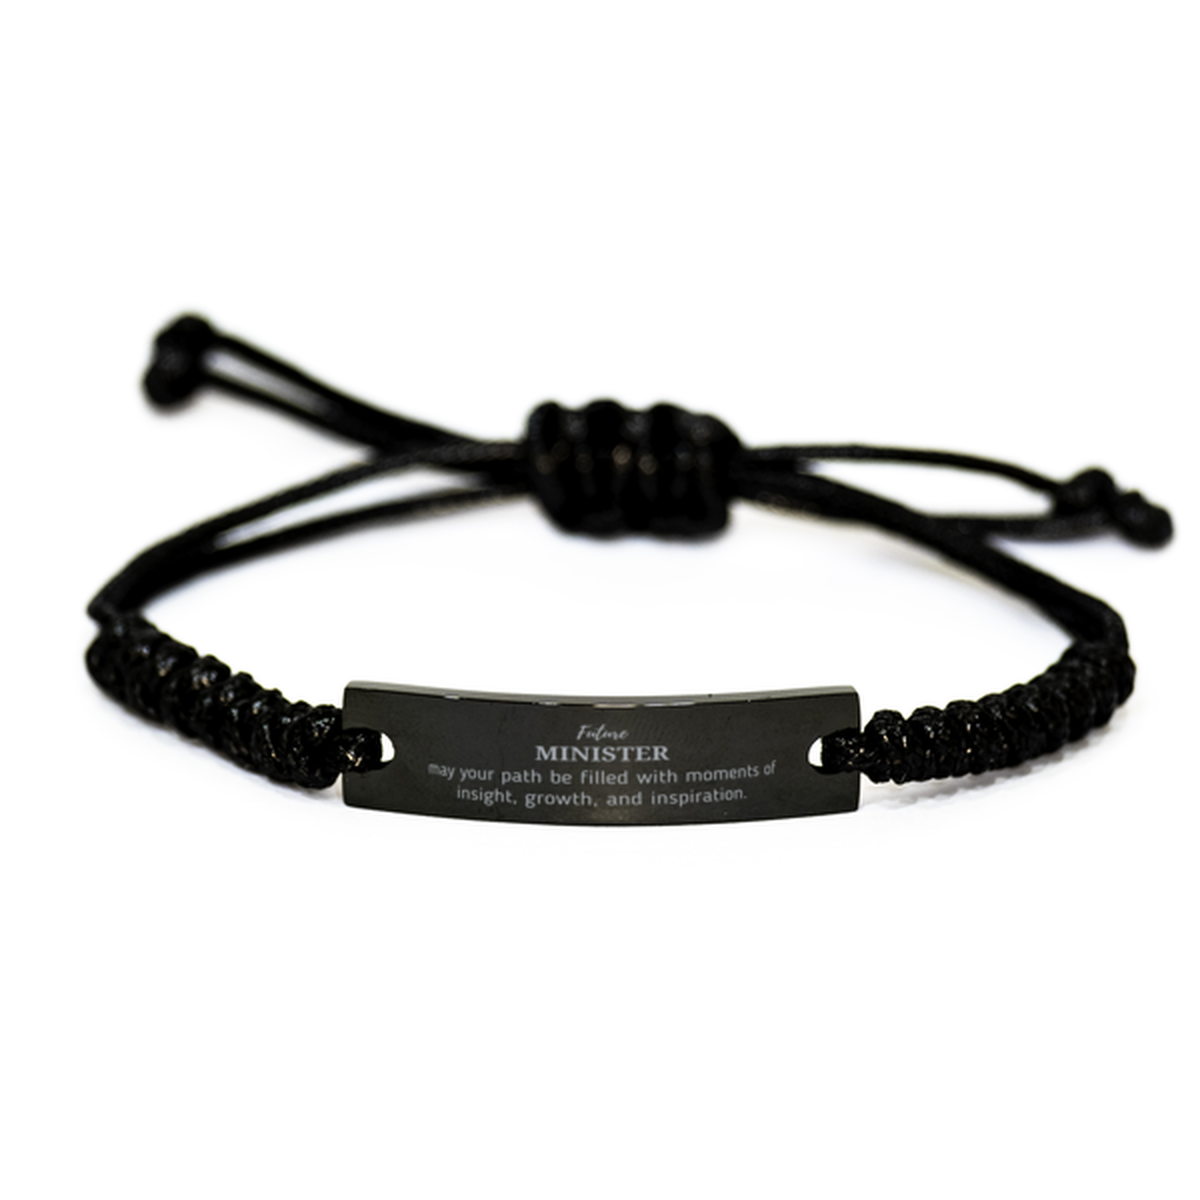 Future Minister Gifts, May your path be filled with moments of insight, Graduation Gifts for New Minister, Christmas Unique Black Rope Bracelet For Men, Women, Friends